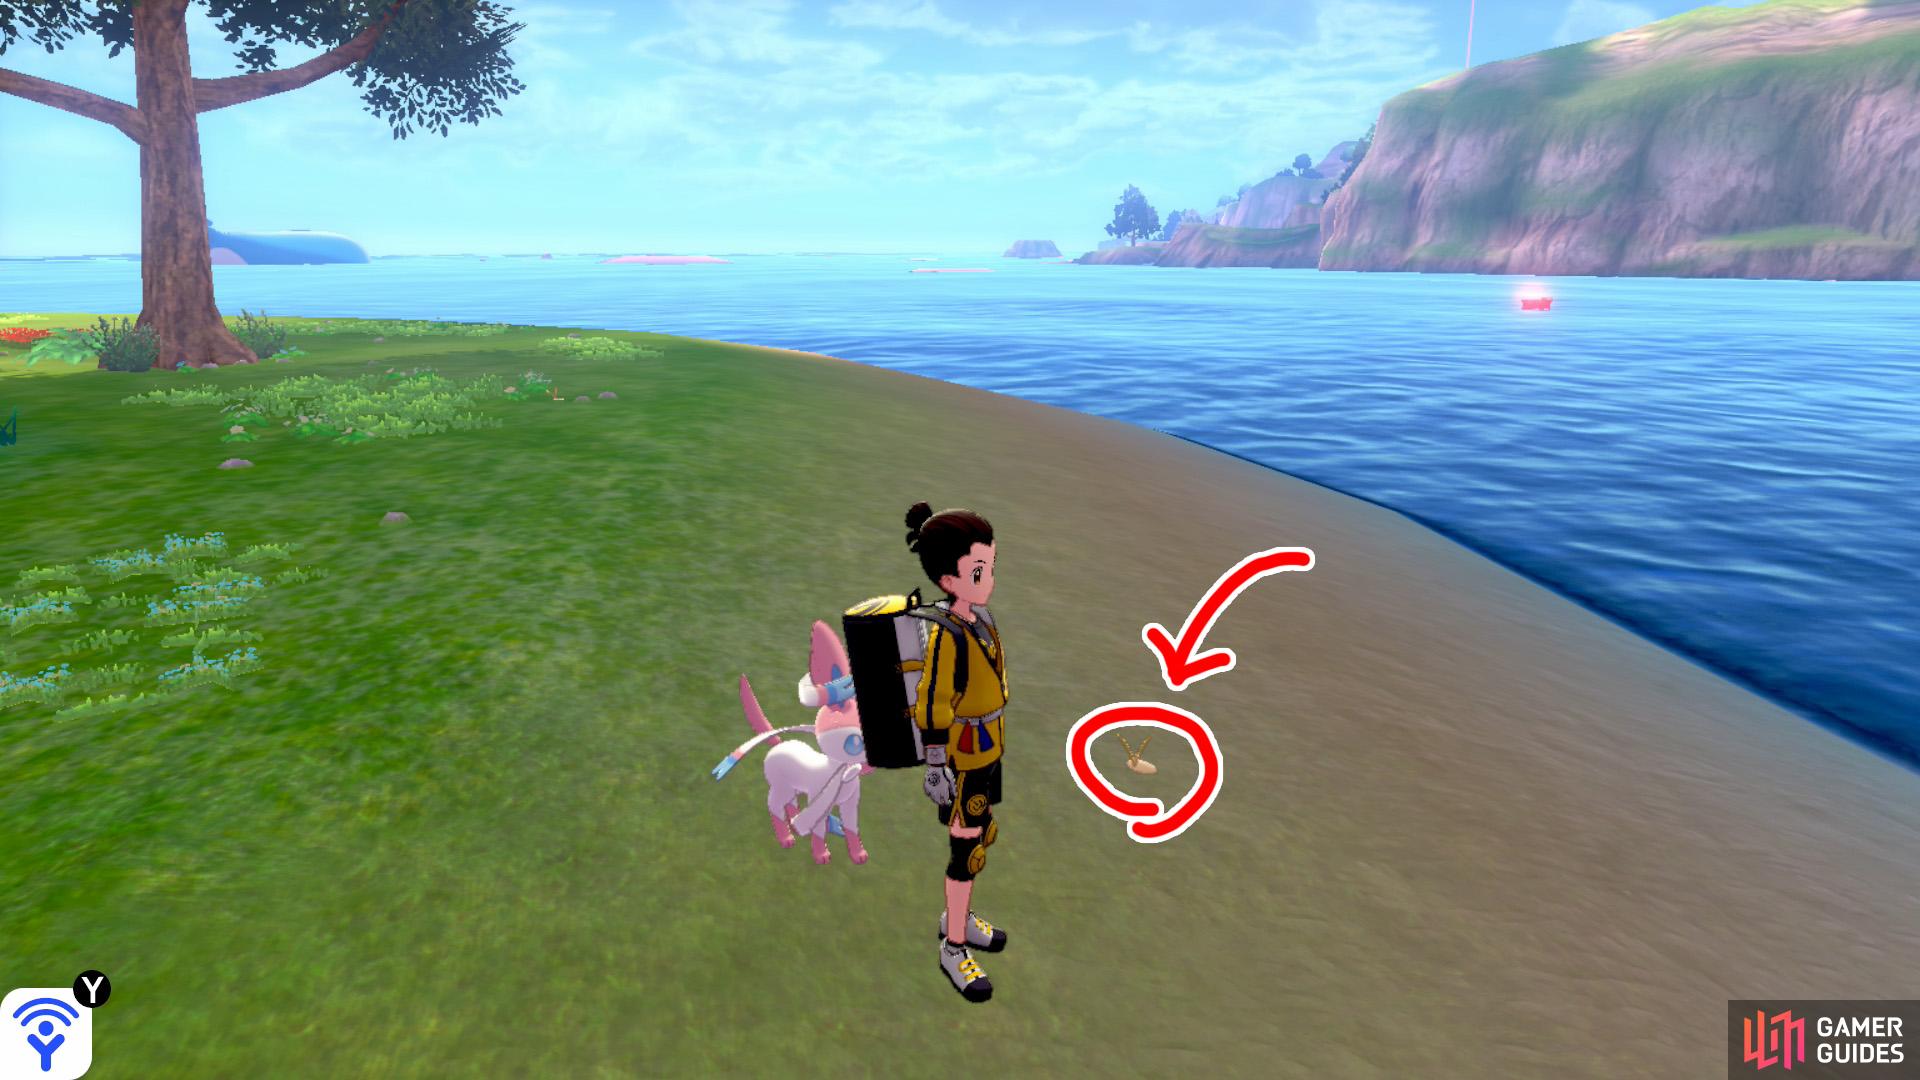 2/11: From Diglett 1, turn left so you're parallel to the mainland. Head to the far-off island with three trees (it might look like two trees). Upon arrival, travel clock-wise around the island. It's in the sand, on the side of the island that's facing the mainland.